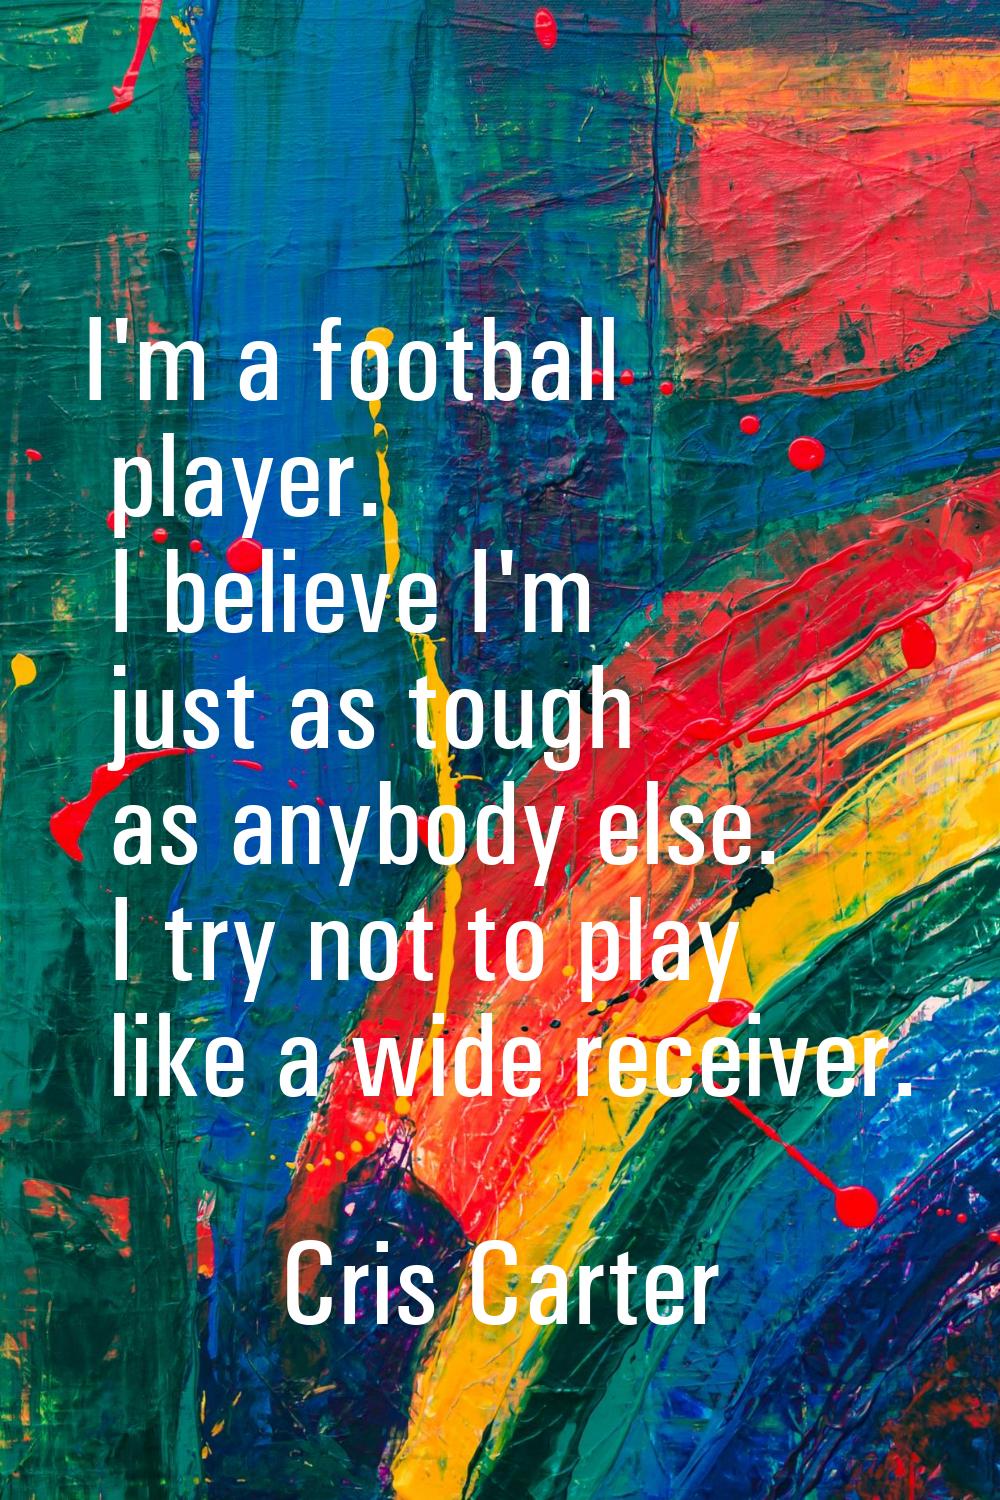 I'm a football player. I believe I'm just as tough as anybody else. I try not to play like a wide r